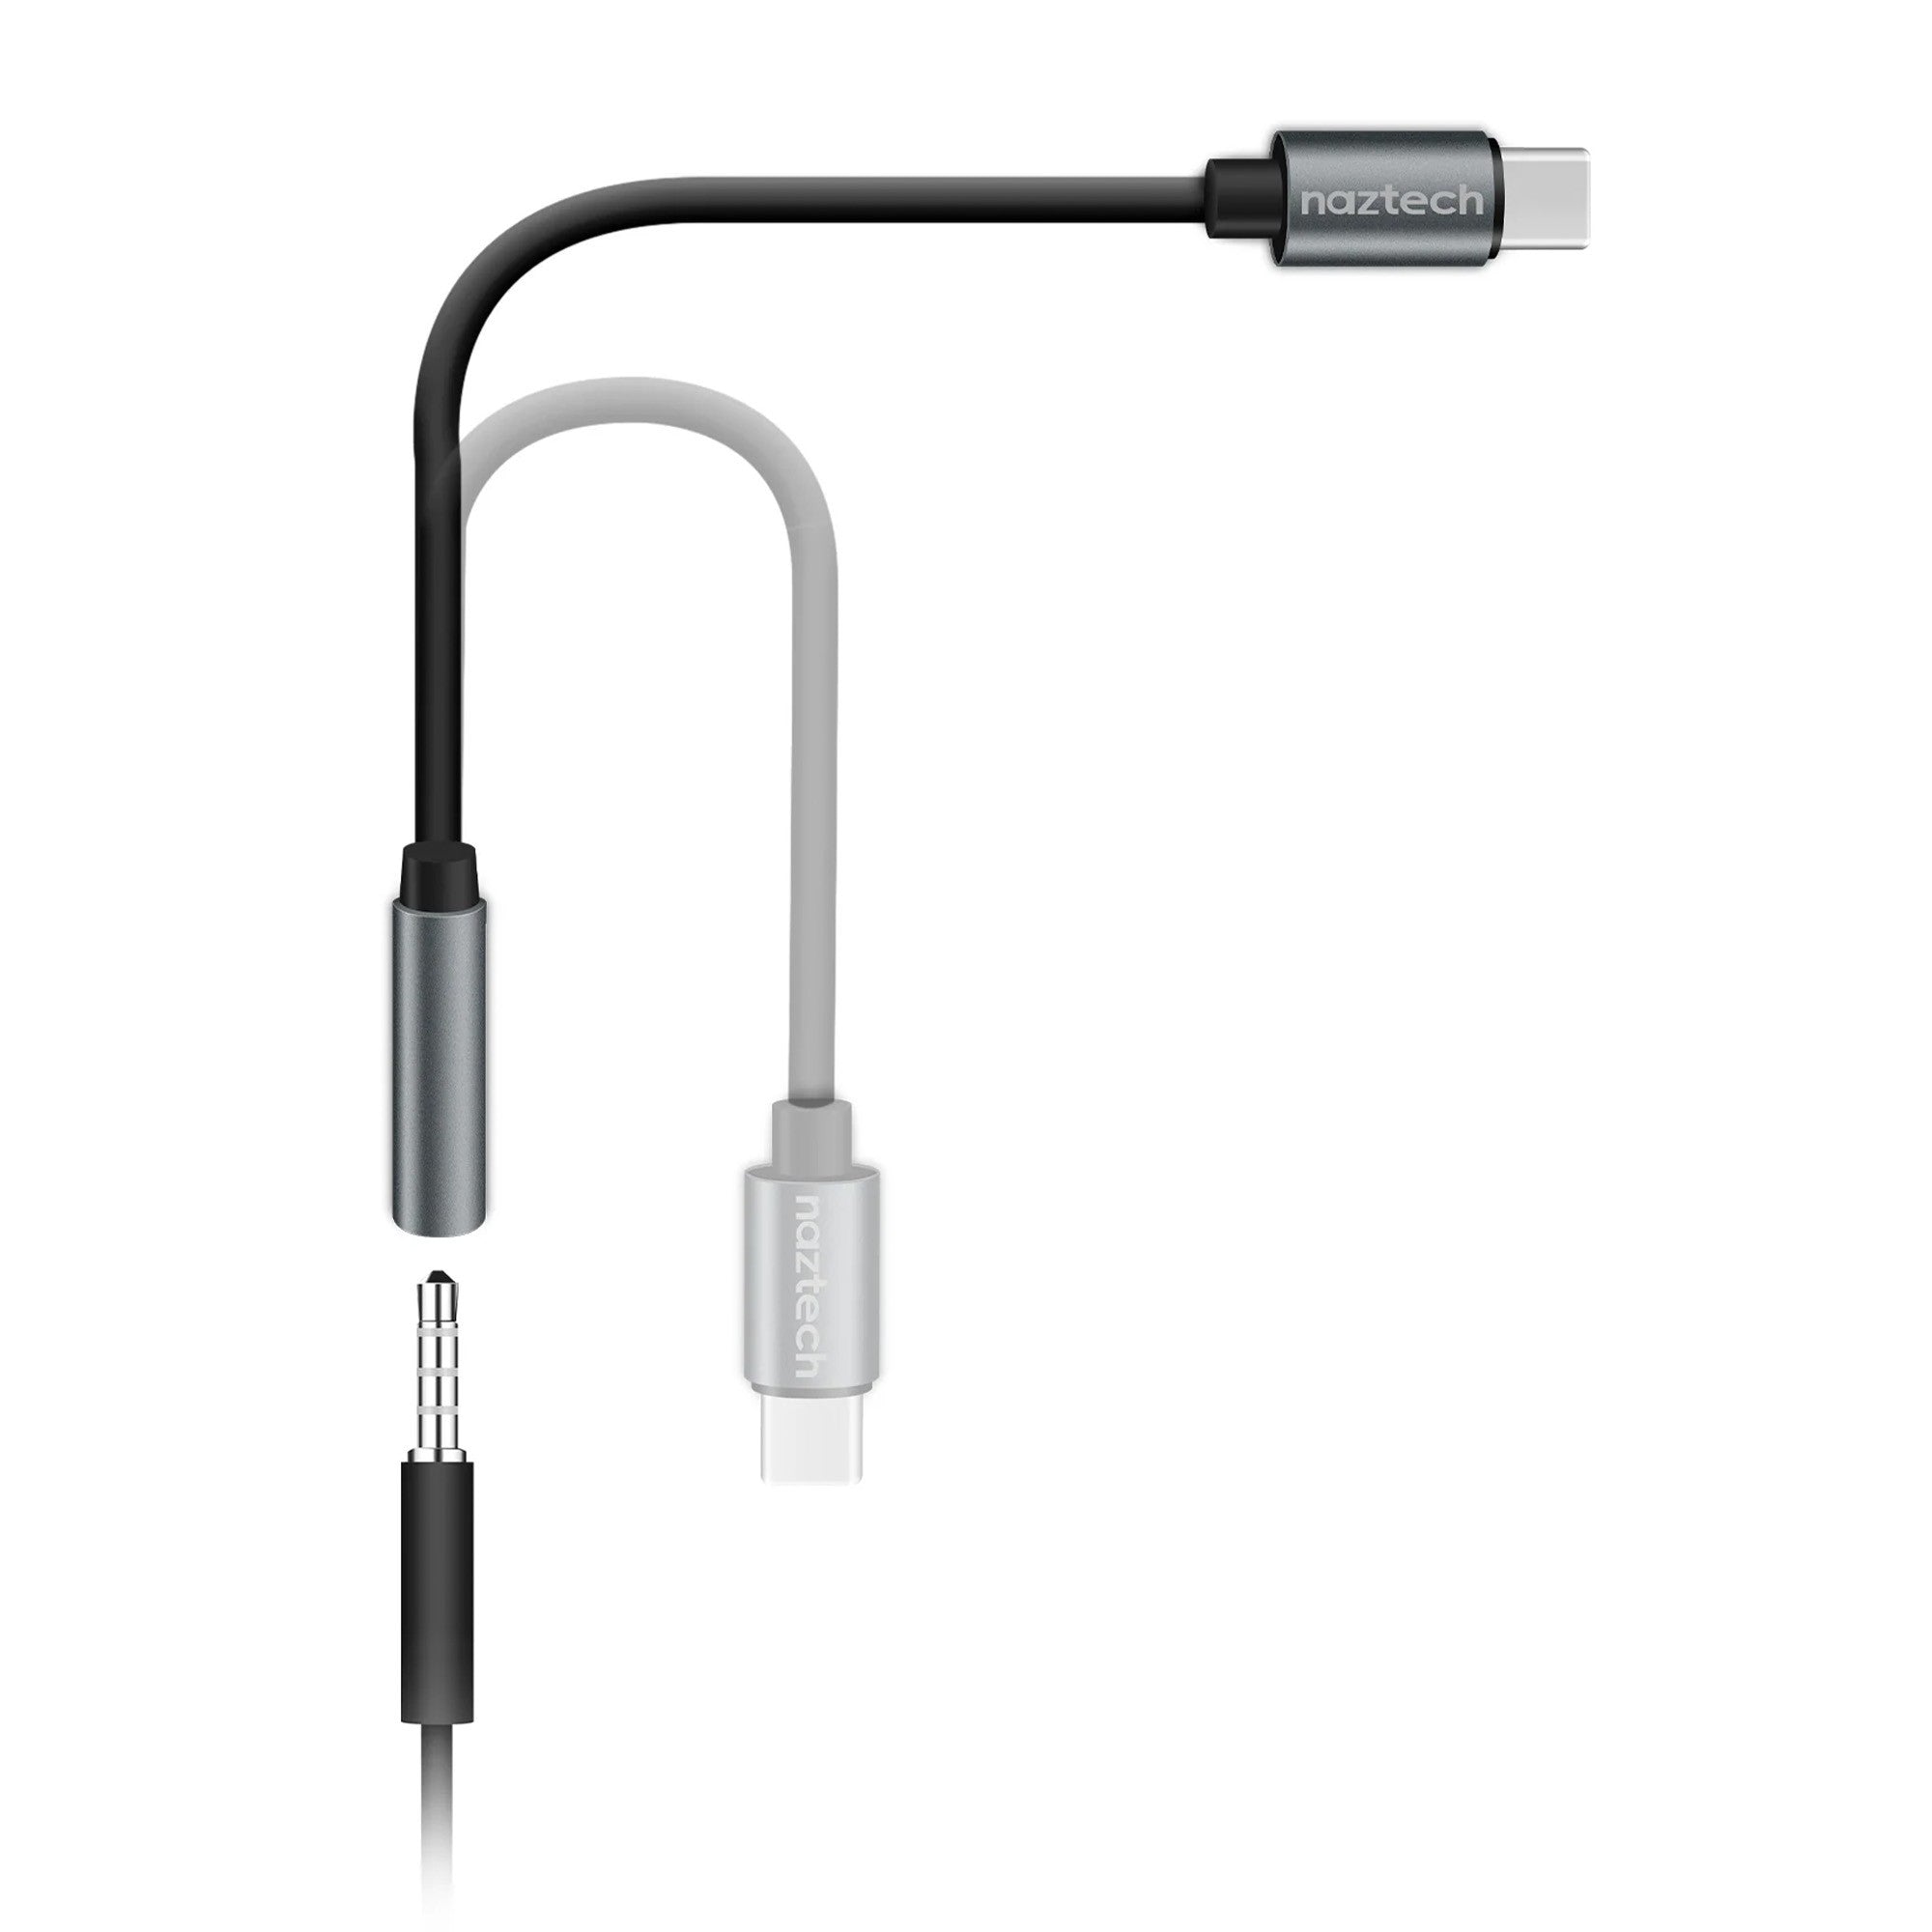 Naztech USB-C to 3.5mm Audio Adapter - 15-12224